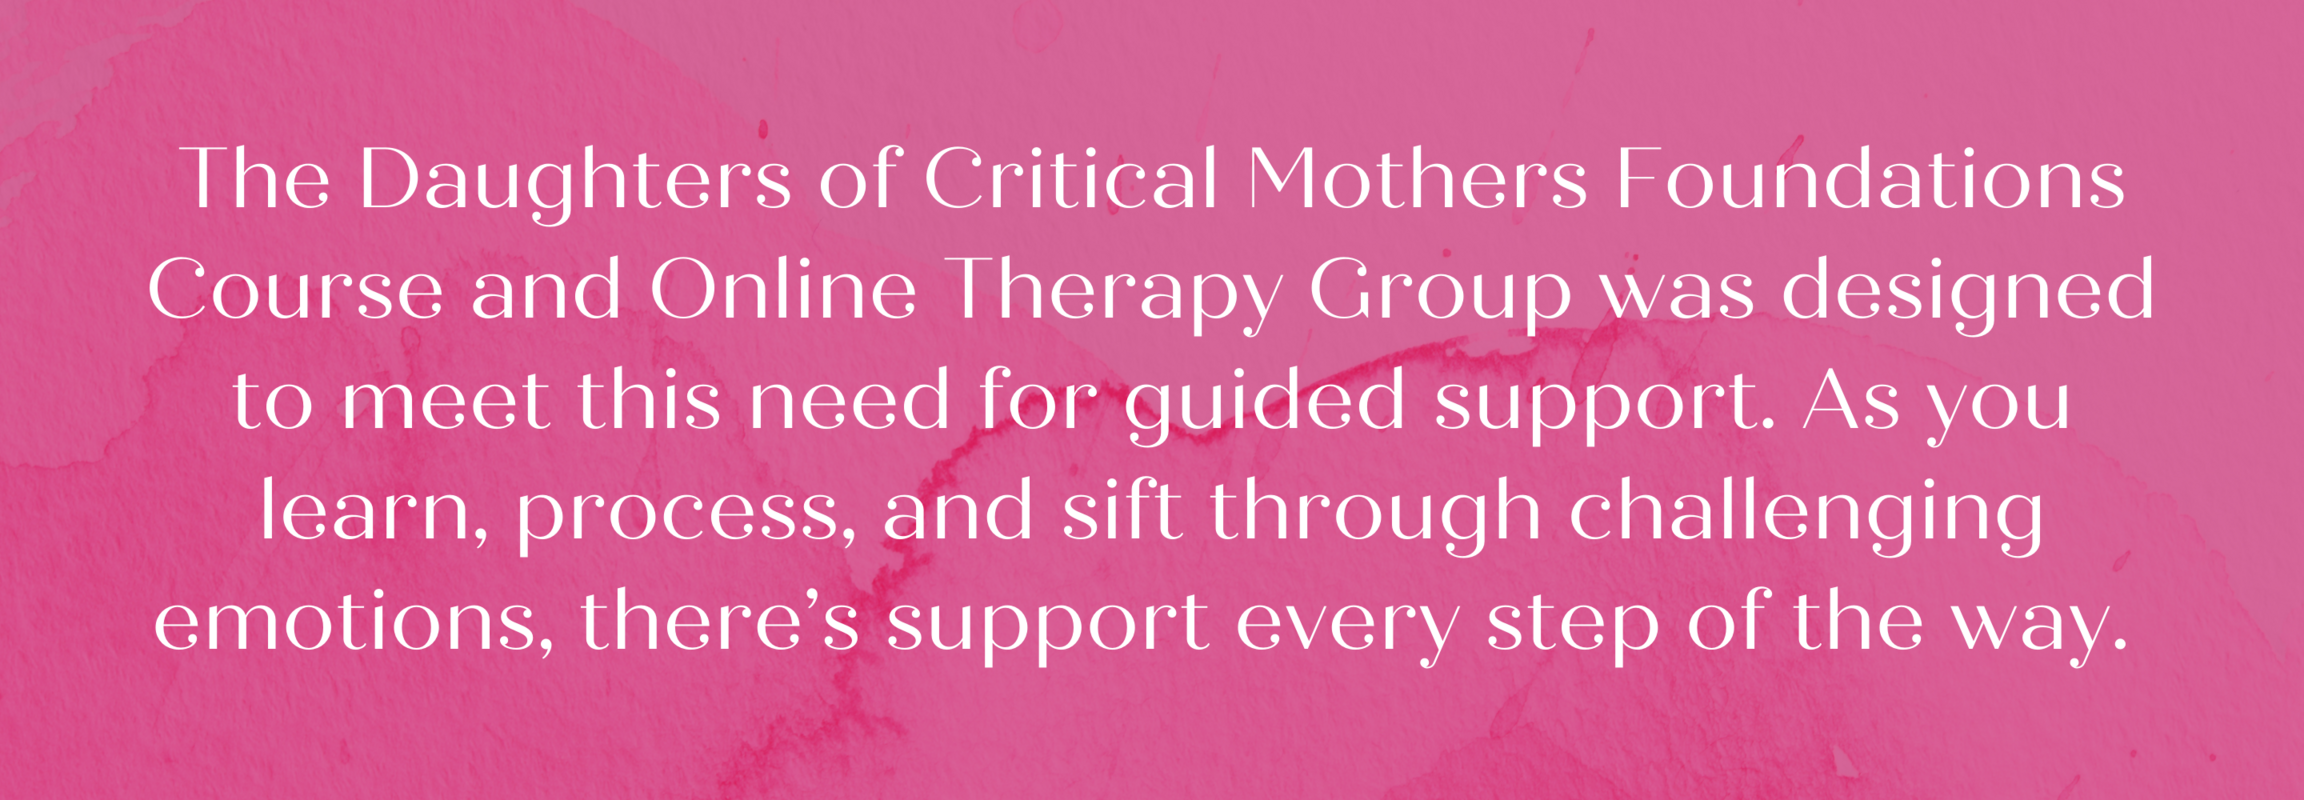 The Daughters of Critical Mothers Foundations Course and Online Therapy Group was designed to meet this need for guided support. As you learn, process, and sift through challenging emotions, there’s support every step of the way.